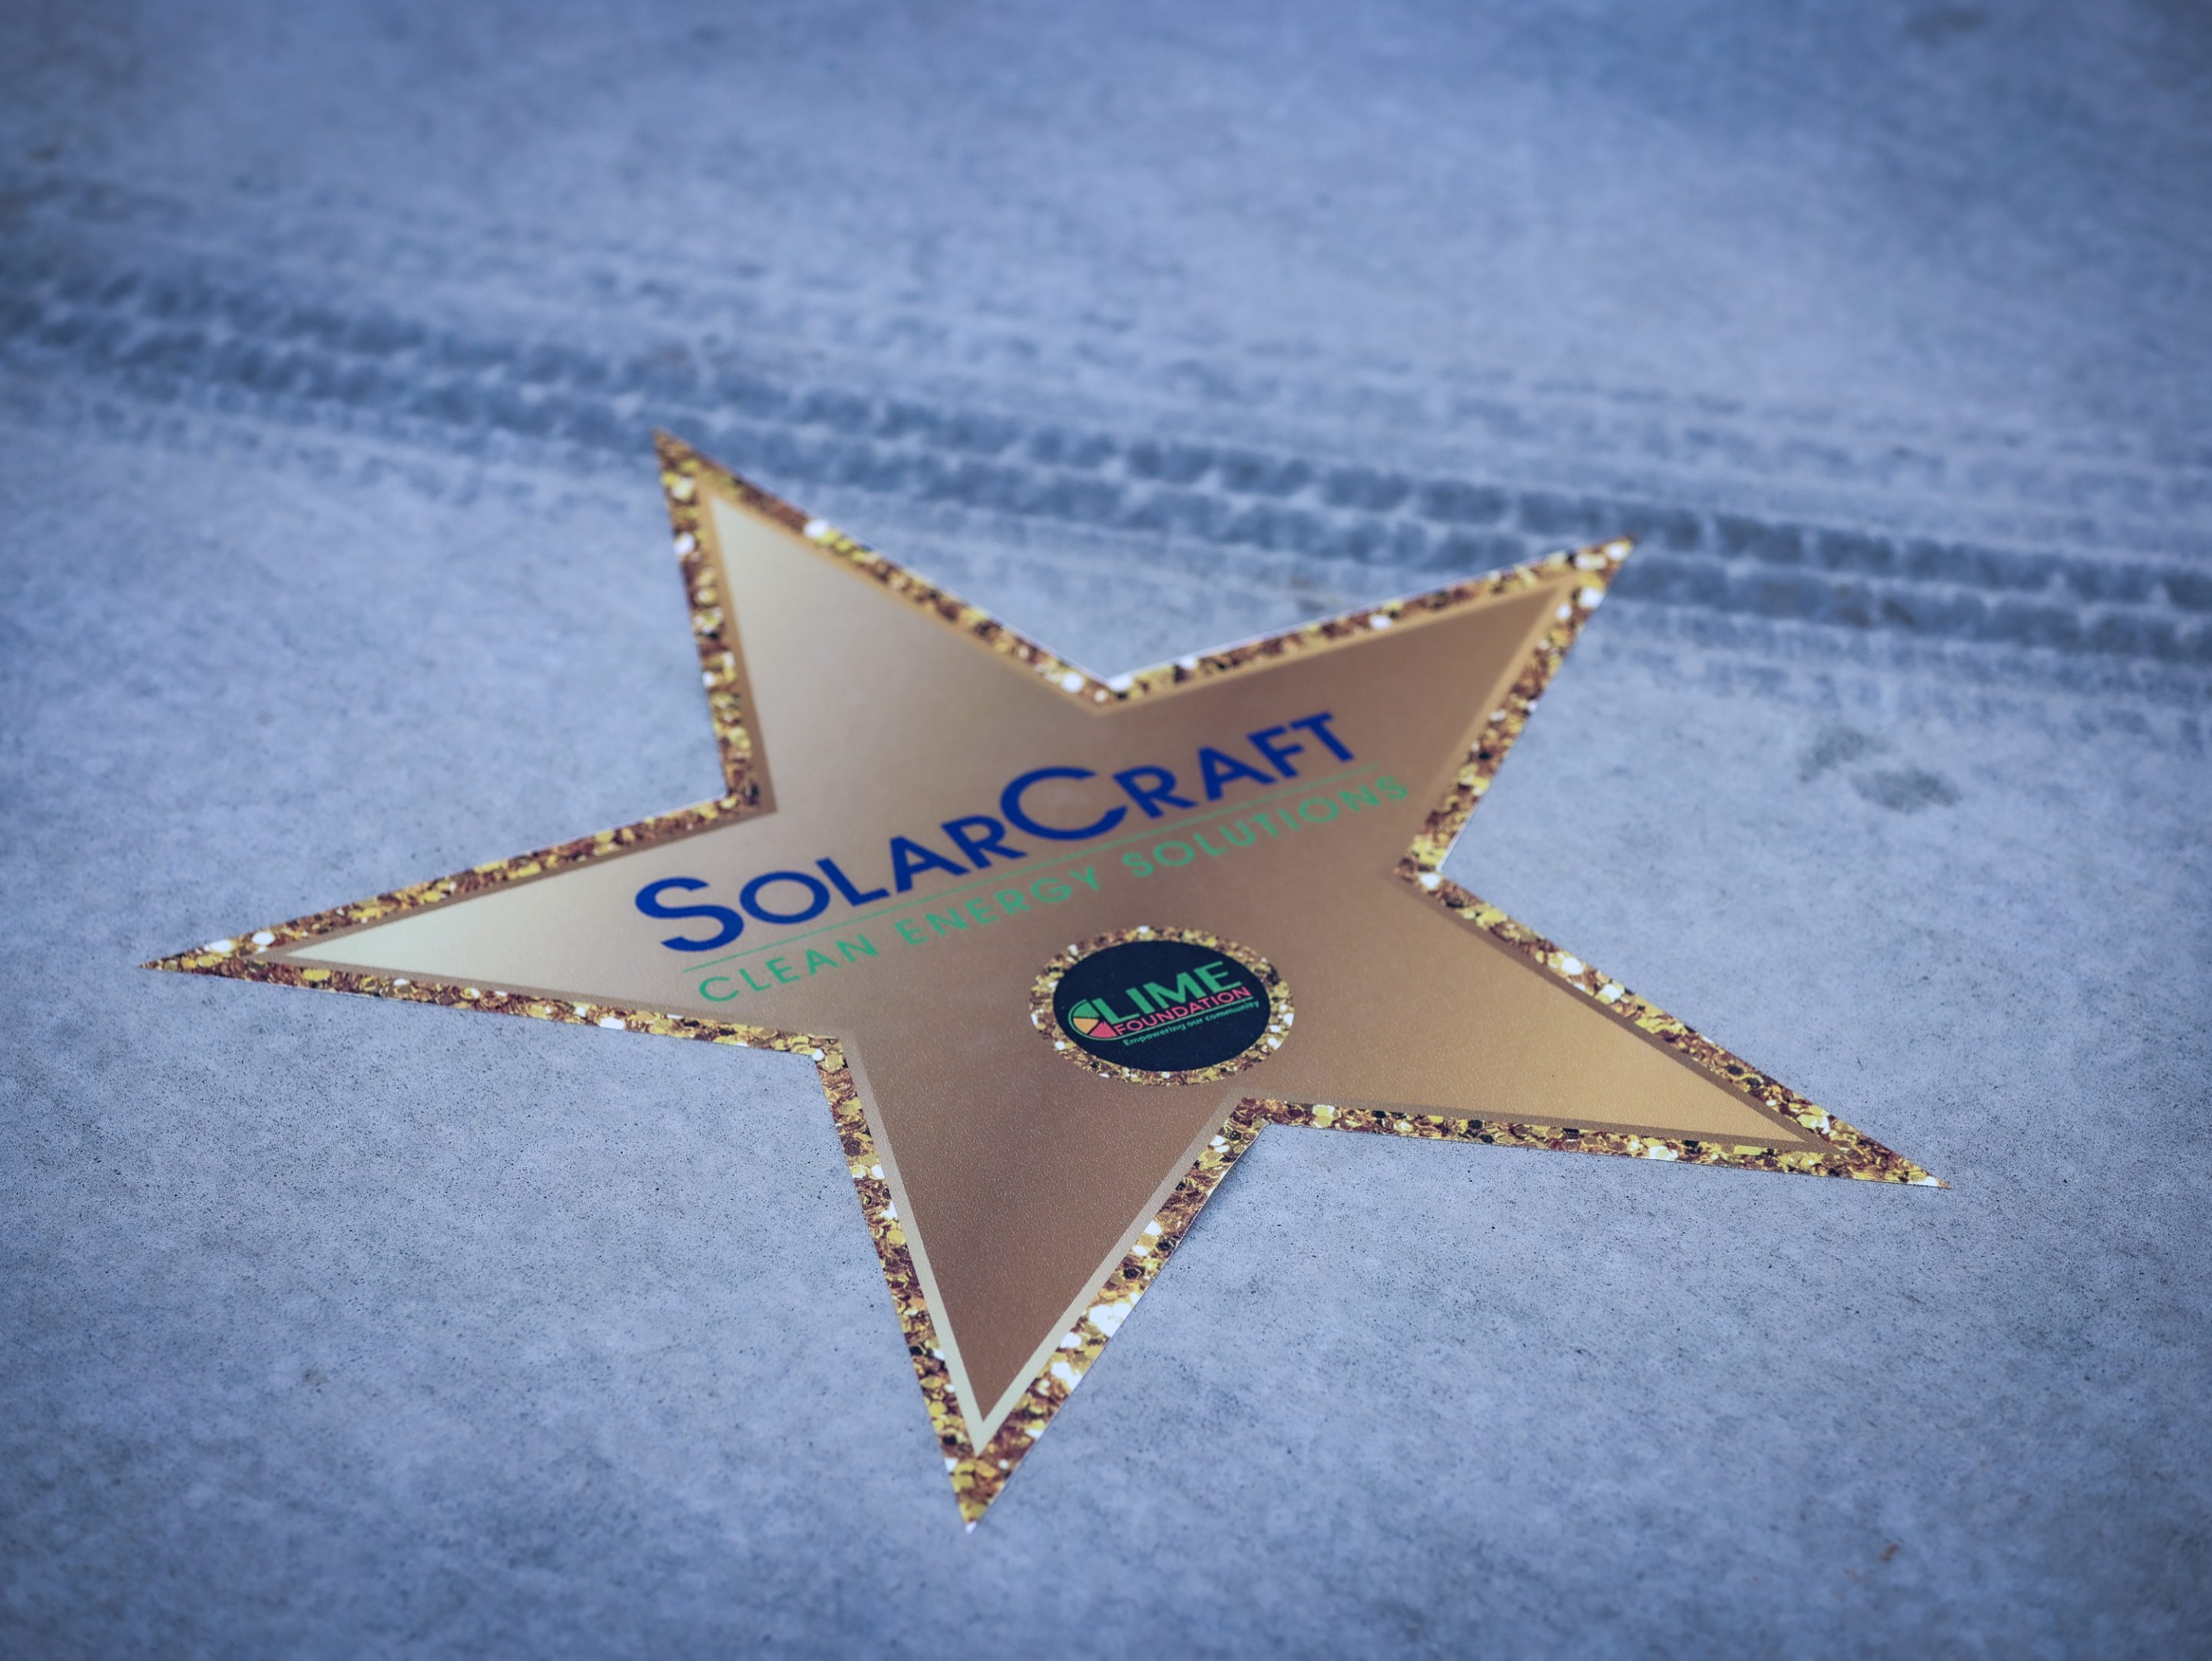 Solarcraft is a Sonoma County Non-Profit Organization dedicated to promoting sustainable energy solutions in the Hollywood community.